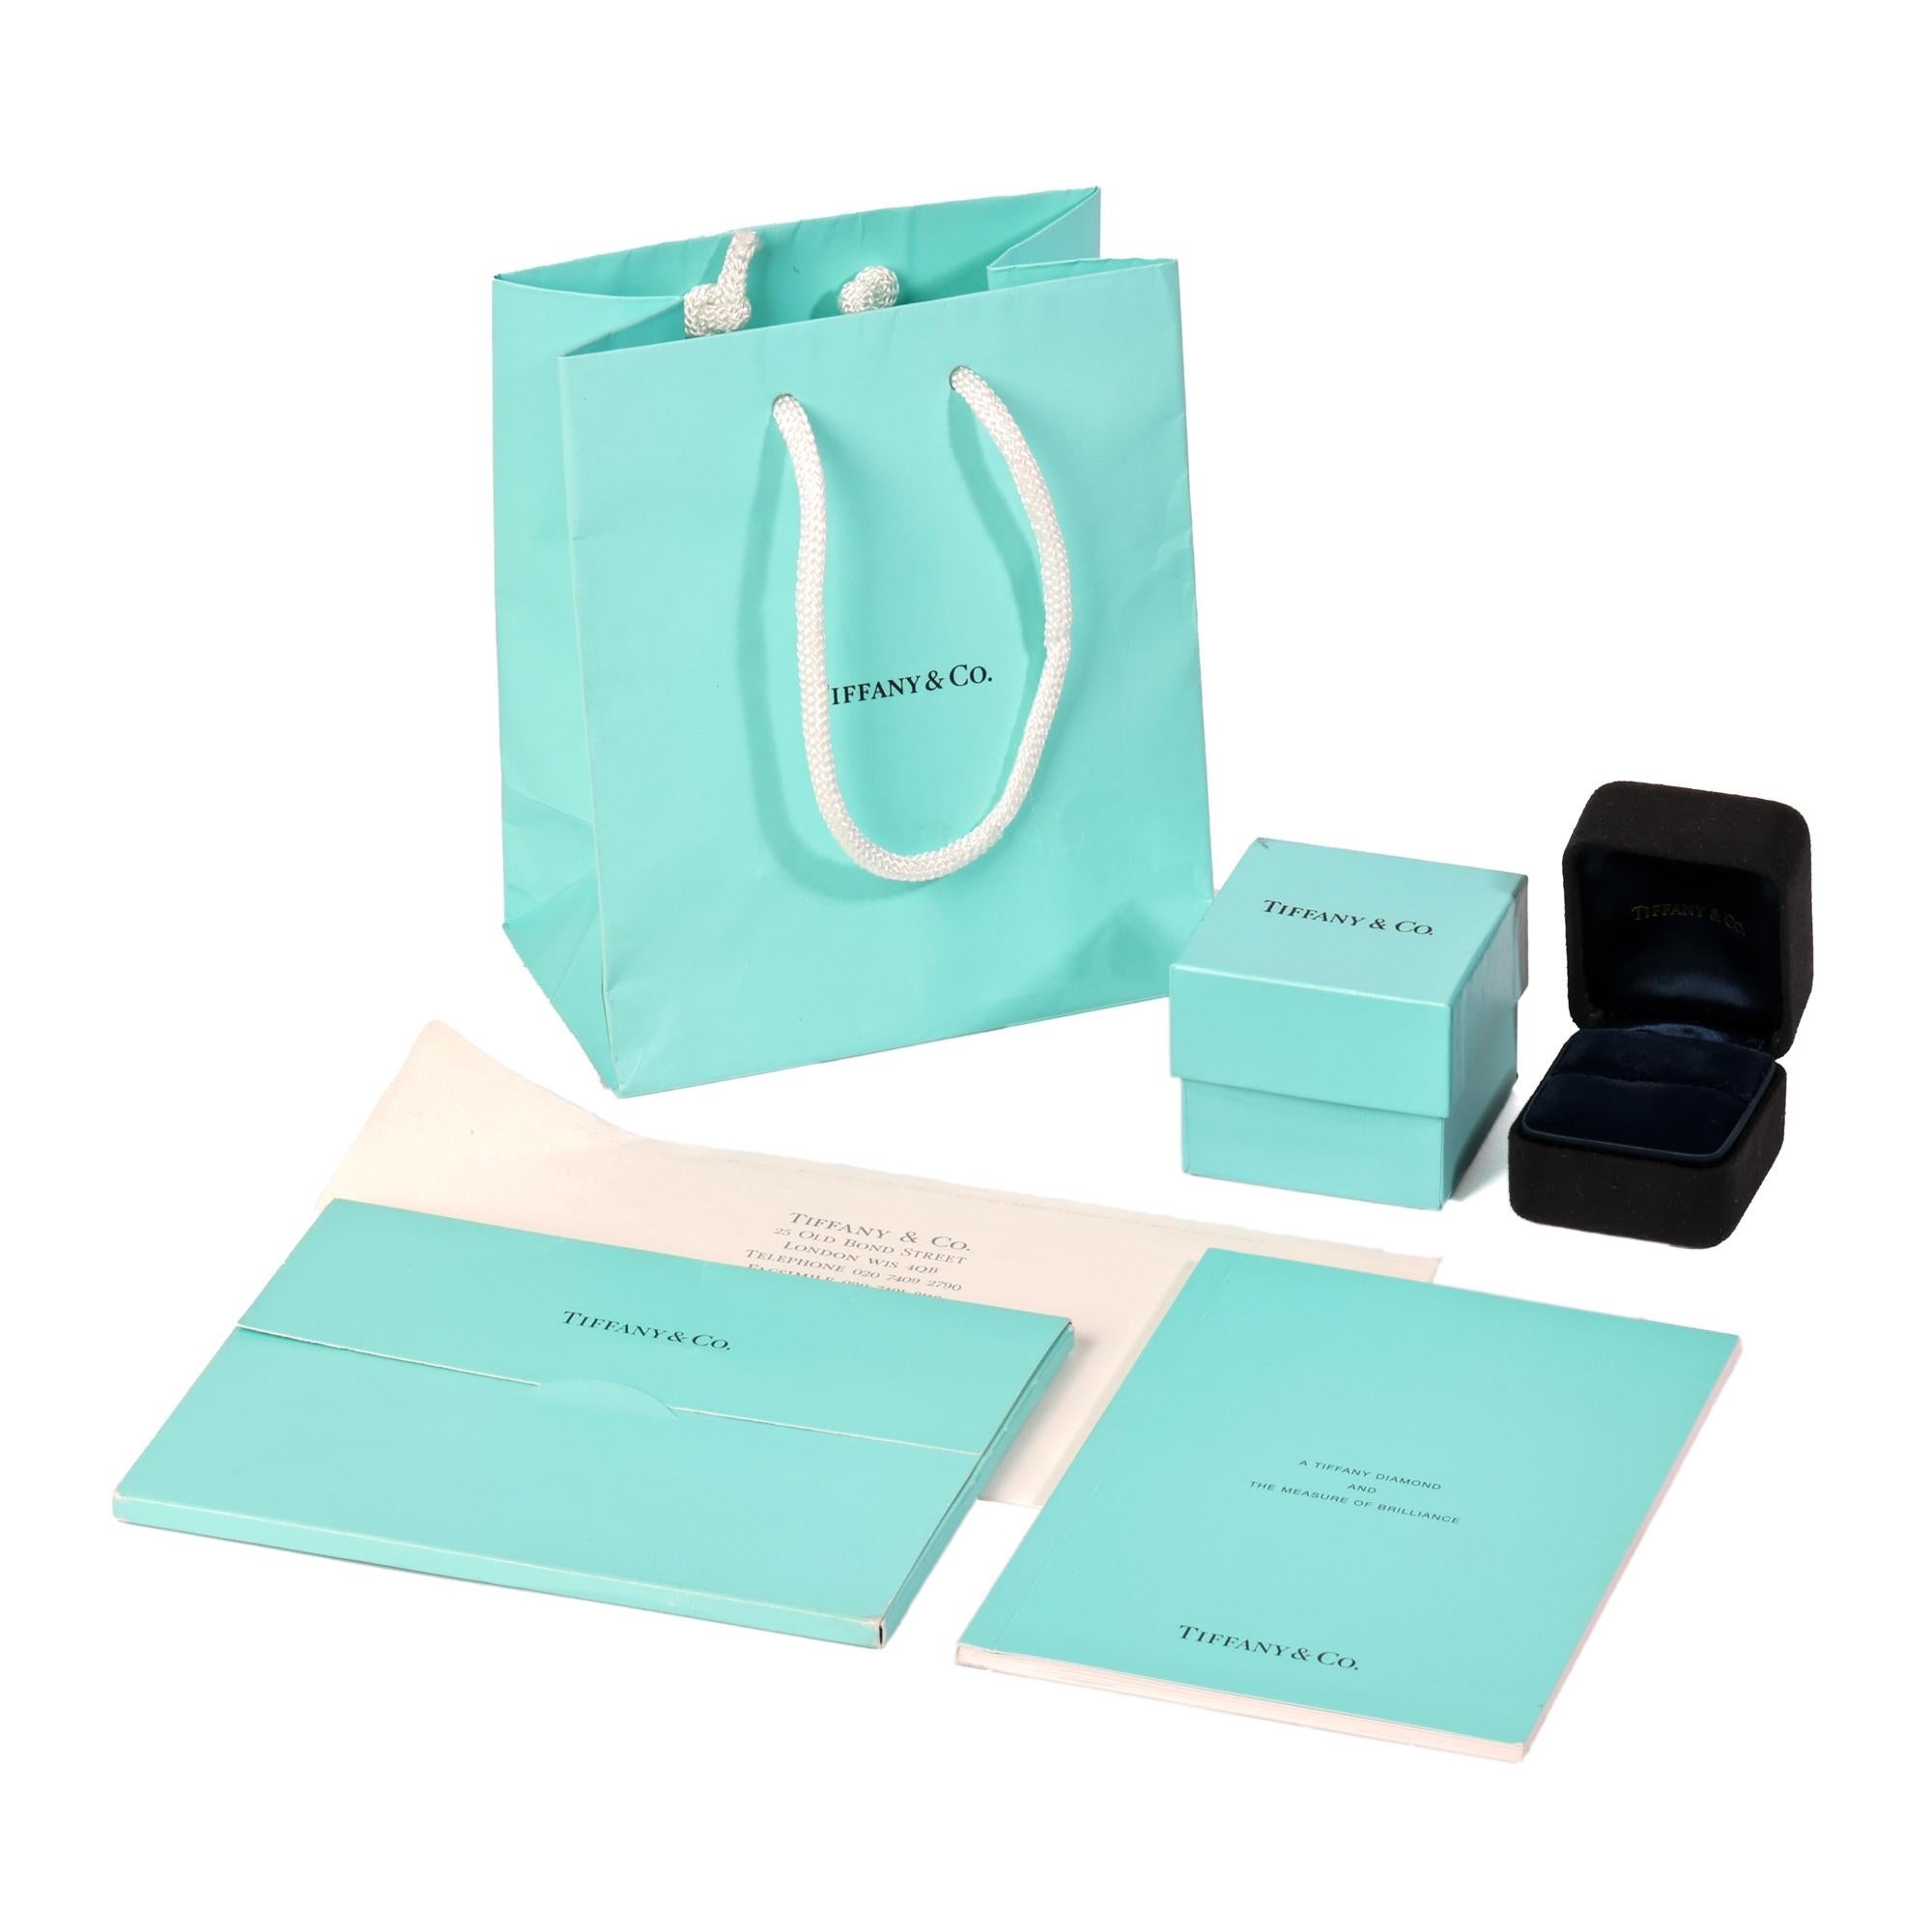 ITEM CONDITION	Excellent
MANUFACTURER	Tiffany & Co.
MODEL	Lucida
GENDER	Women's
ACCOMPANIED BY	Tiffany & Co Box and Certificate
UK RING SIZE	J 1/2
EU RING SIZE	49
US RING SIZE	5
BAND WIDTH	2.5mm
TOTAL WEIGHT	4.38g
PRIMARY STONE QUANTITY	1
PRIMARY